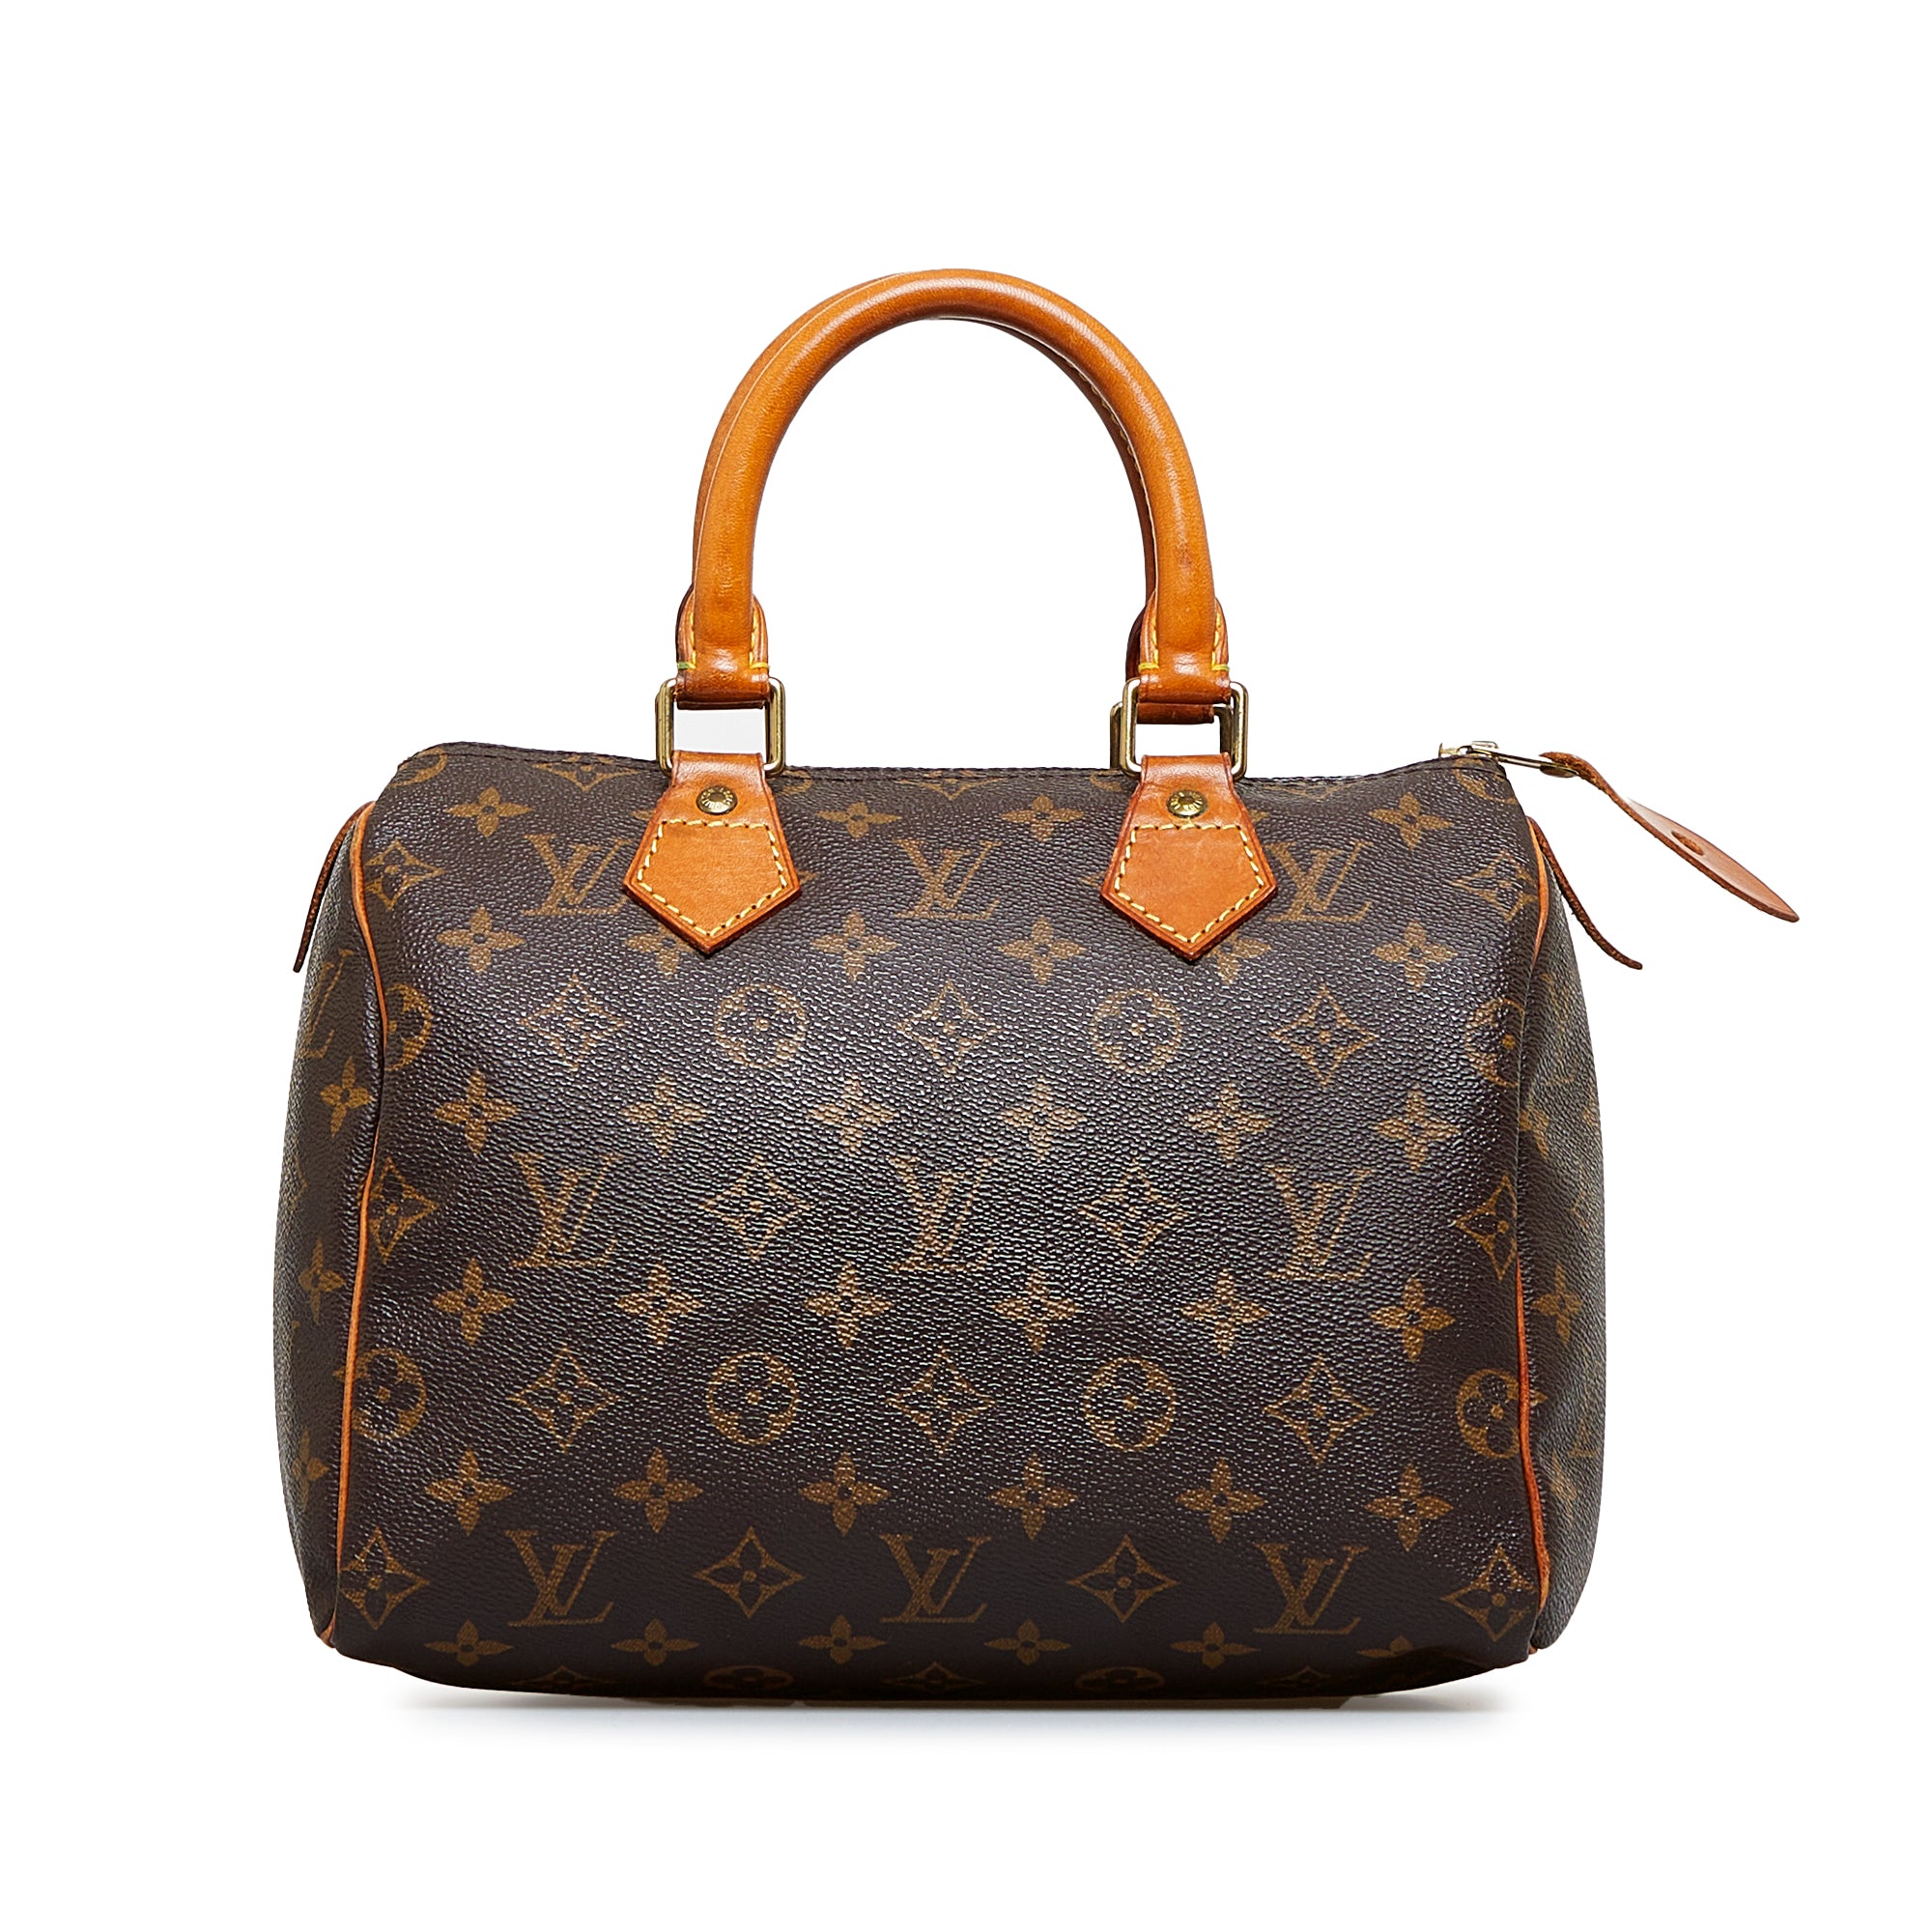 Authentic Louis Vuitton crossbody - jewelry - by owner - sale - craigslist